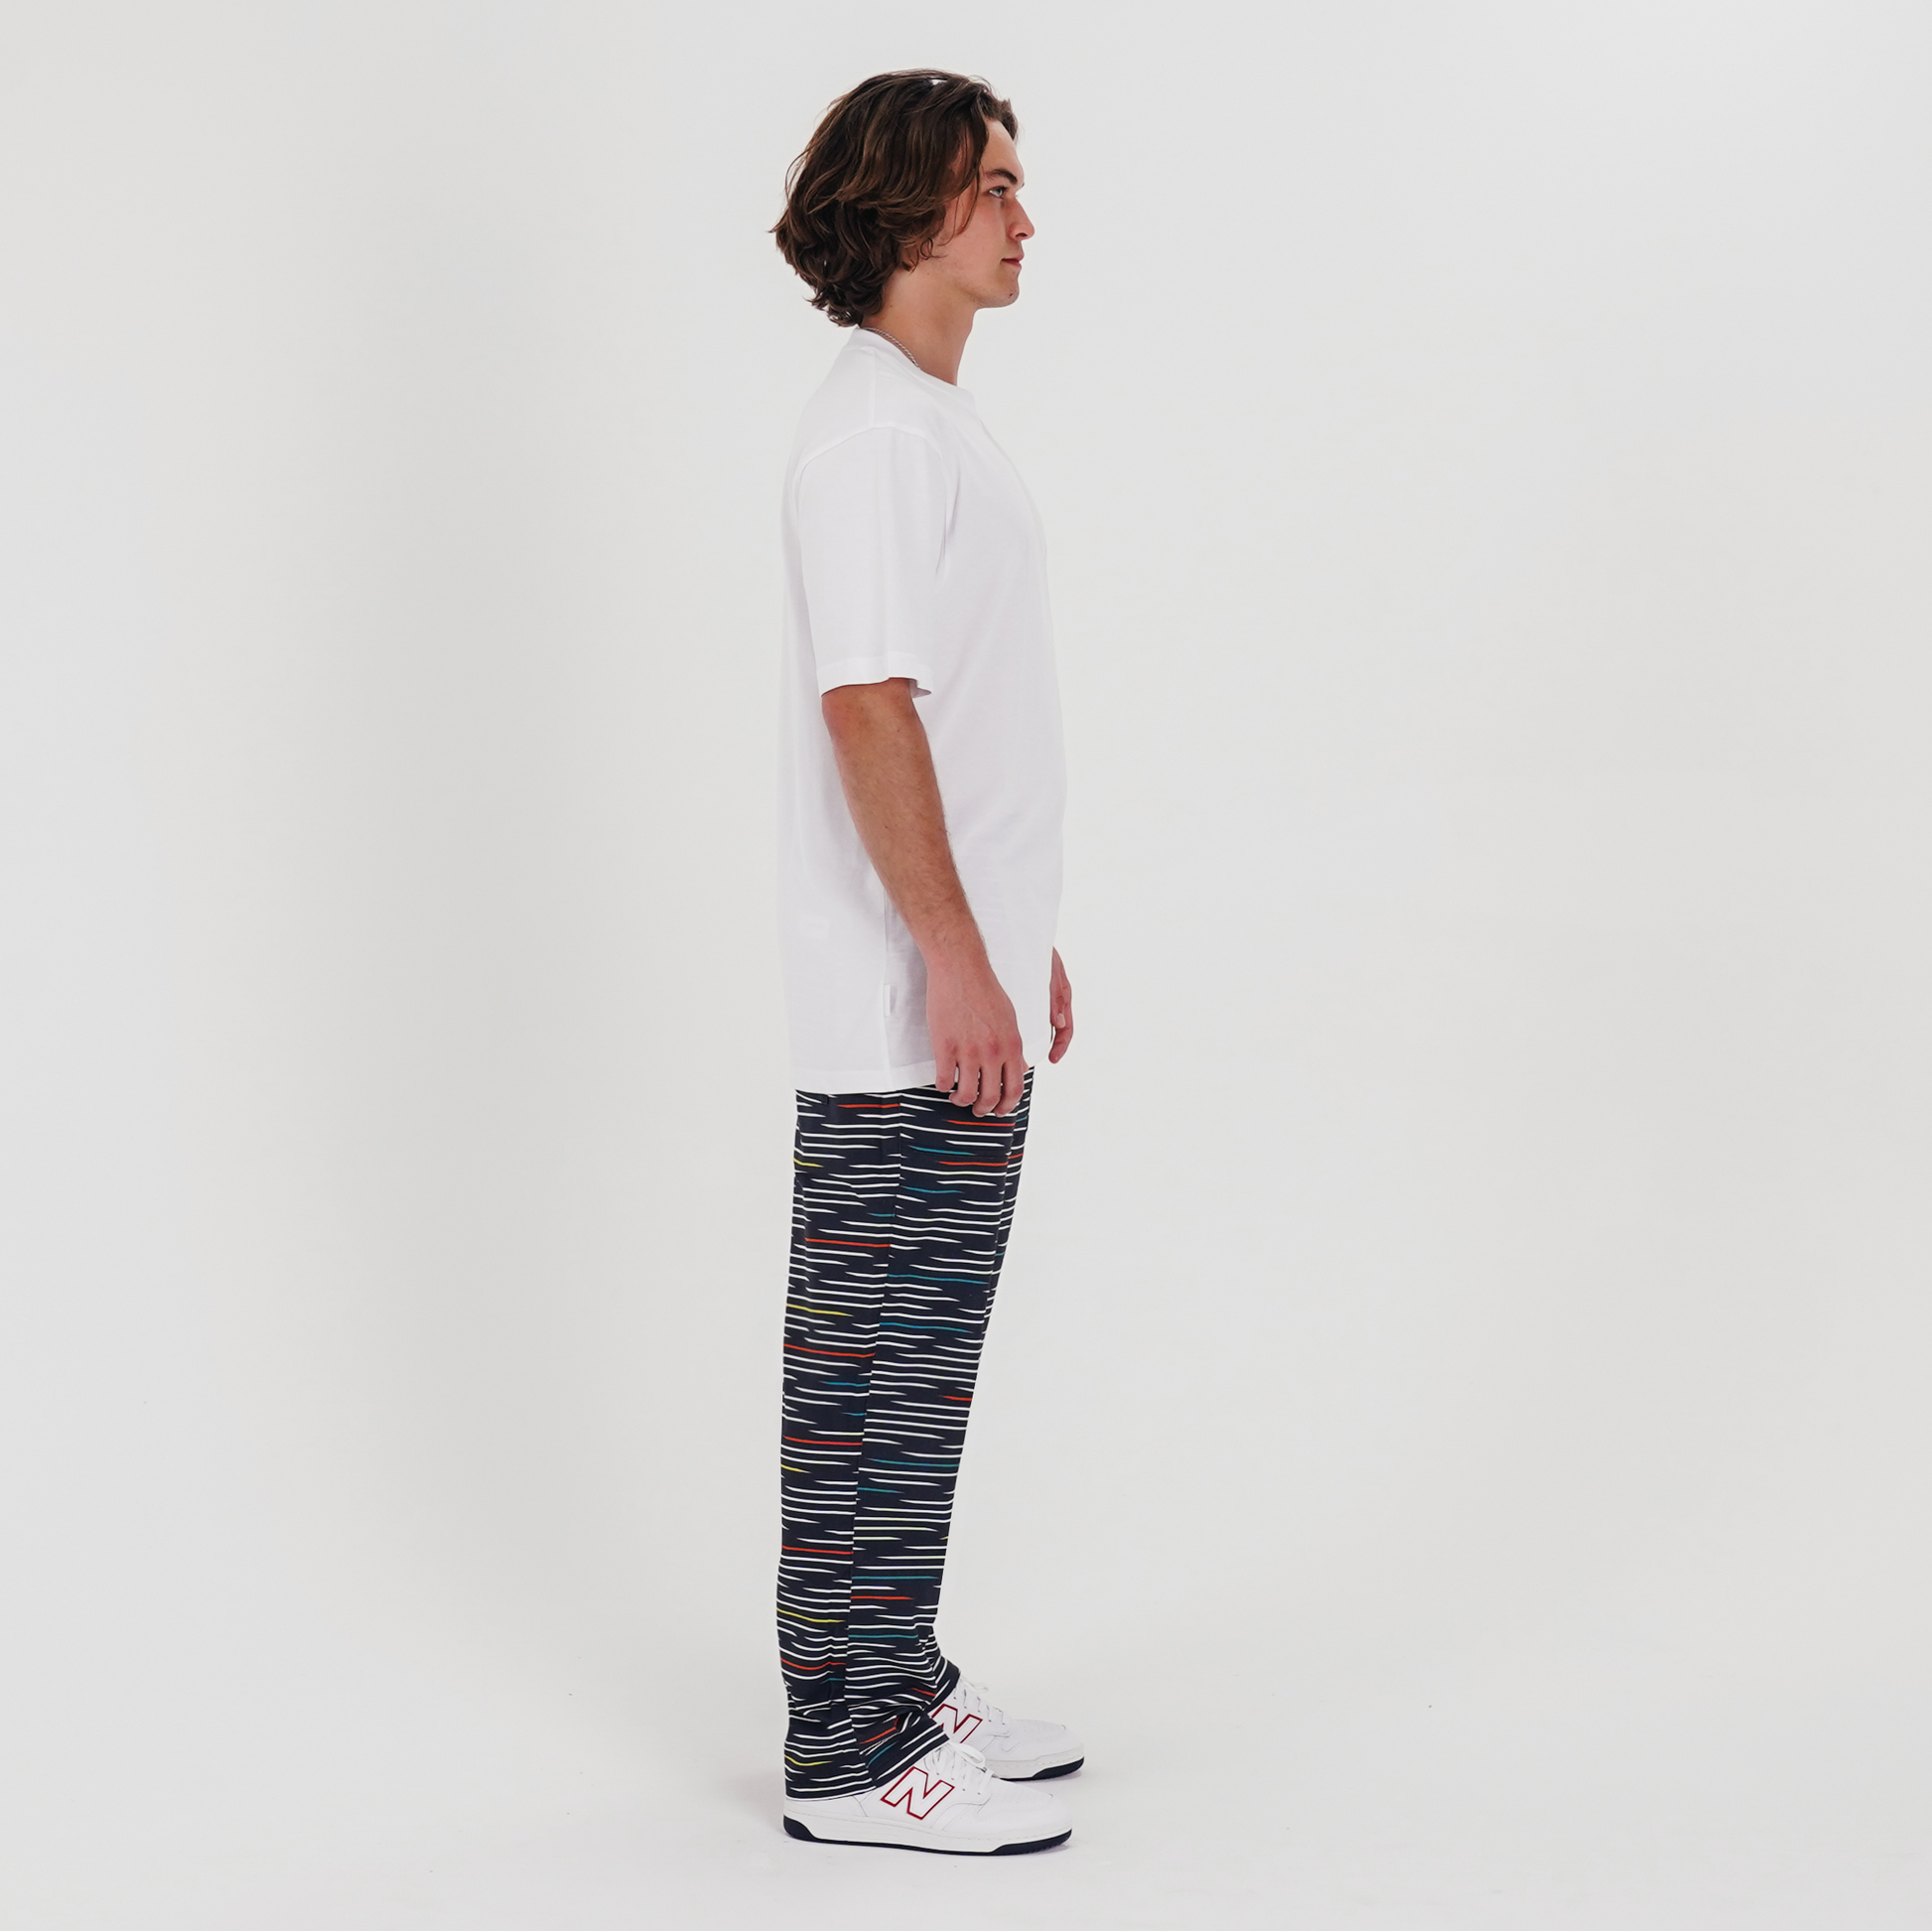 The Mens Surf Pant Printed Katouche Navy from Parlez clothing